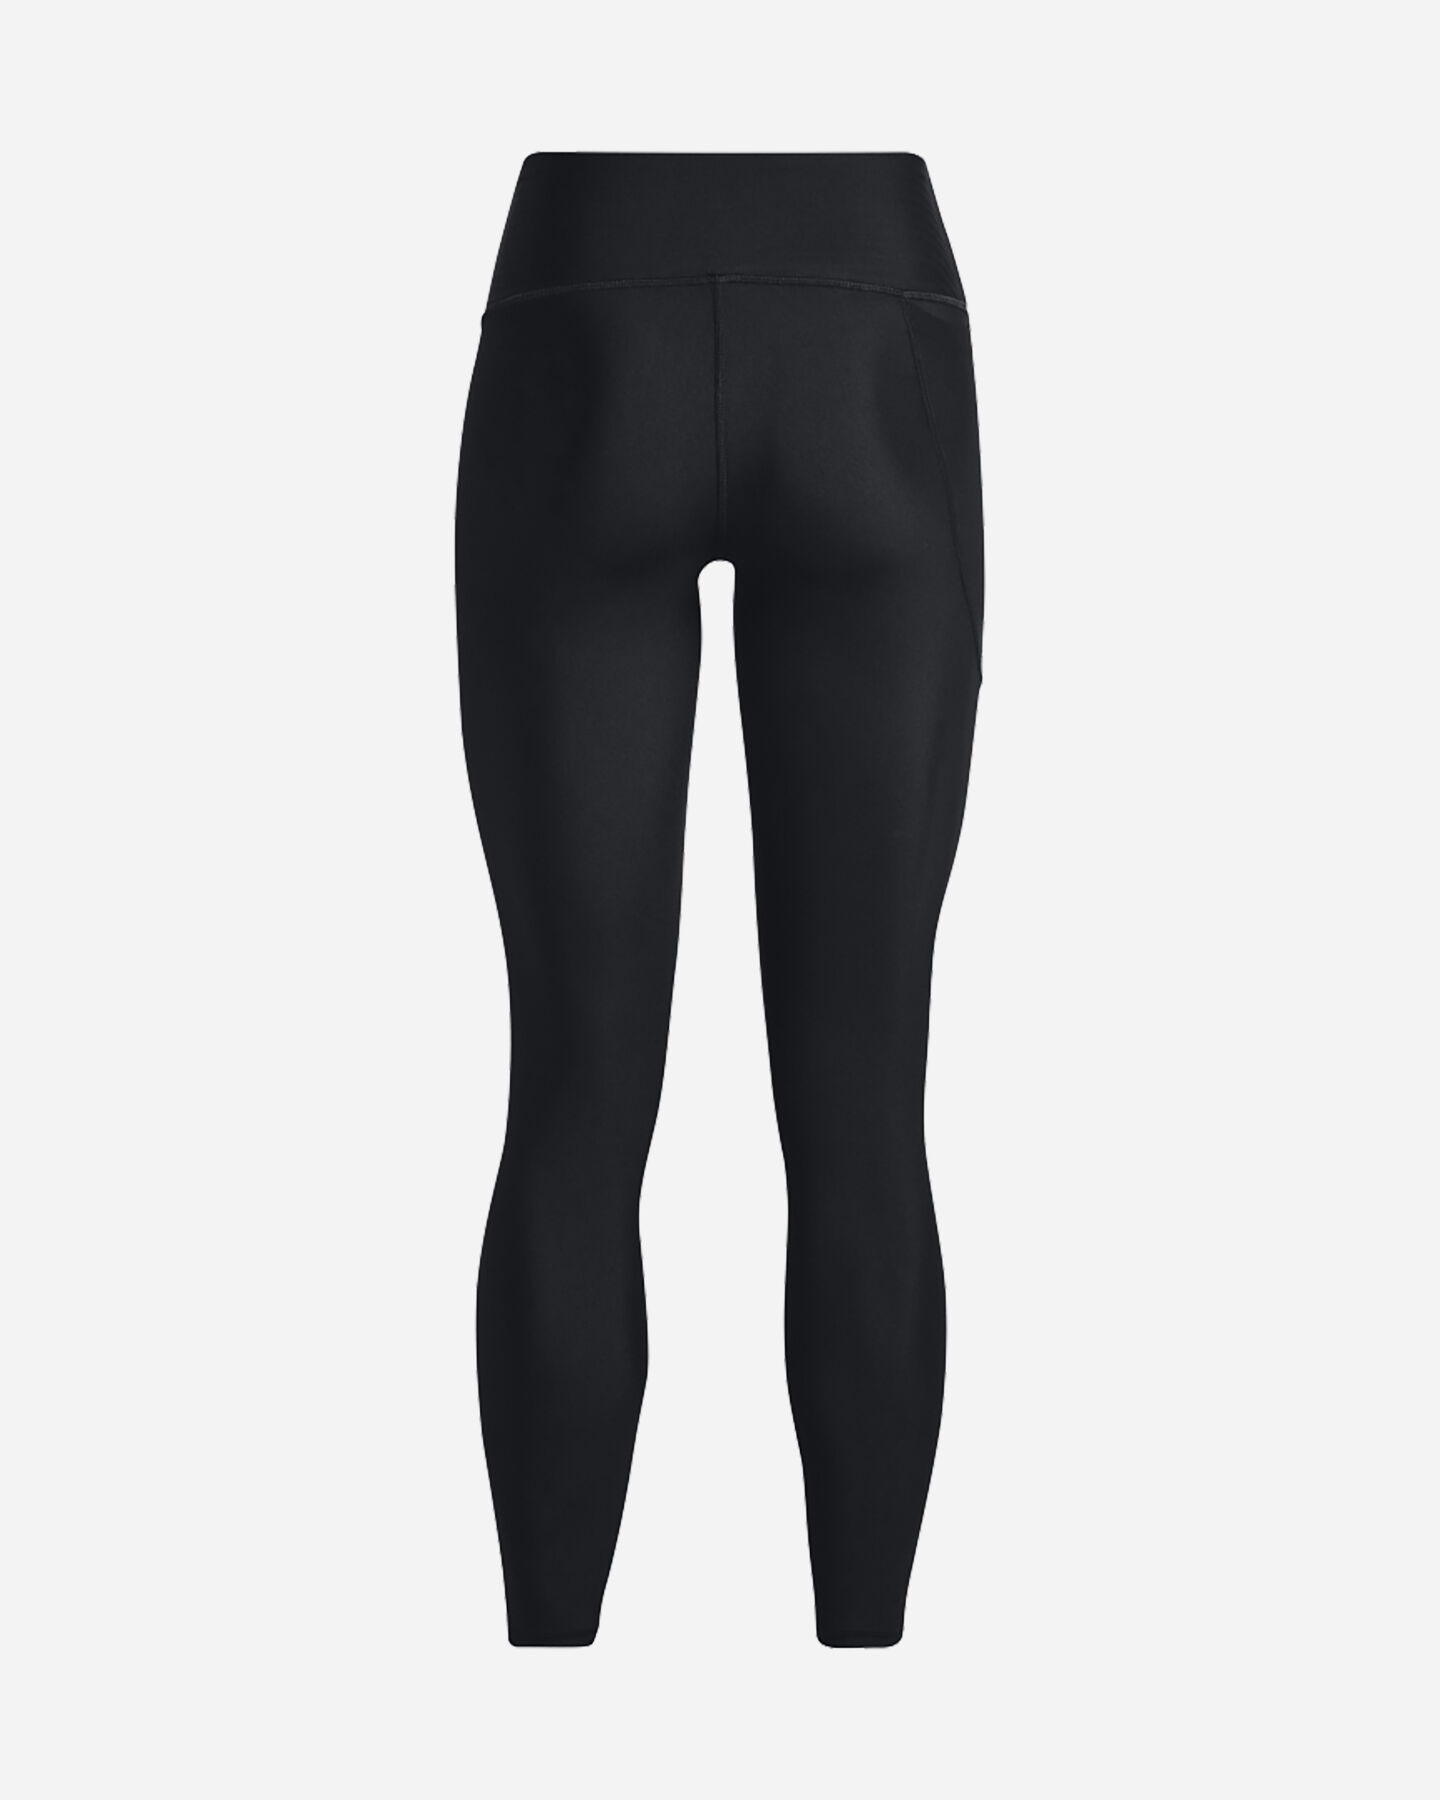  Leggings UNDER ARMOUR BRANDED W S5459646|0001|XS scatto 1